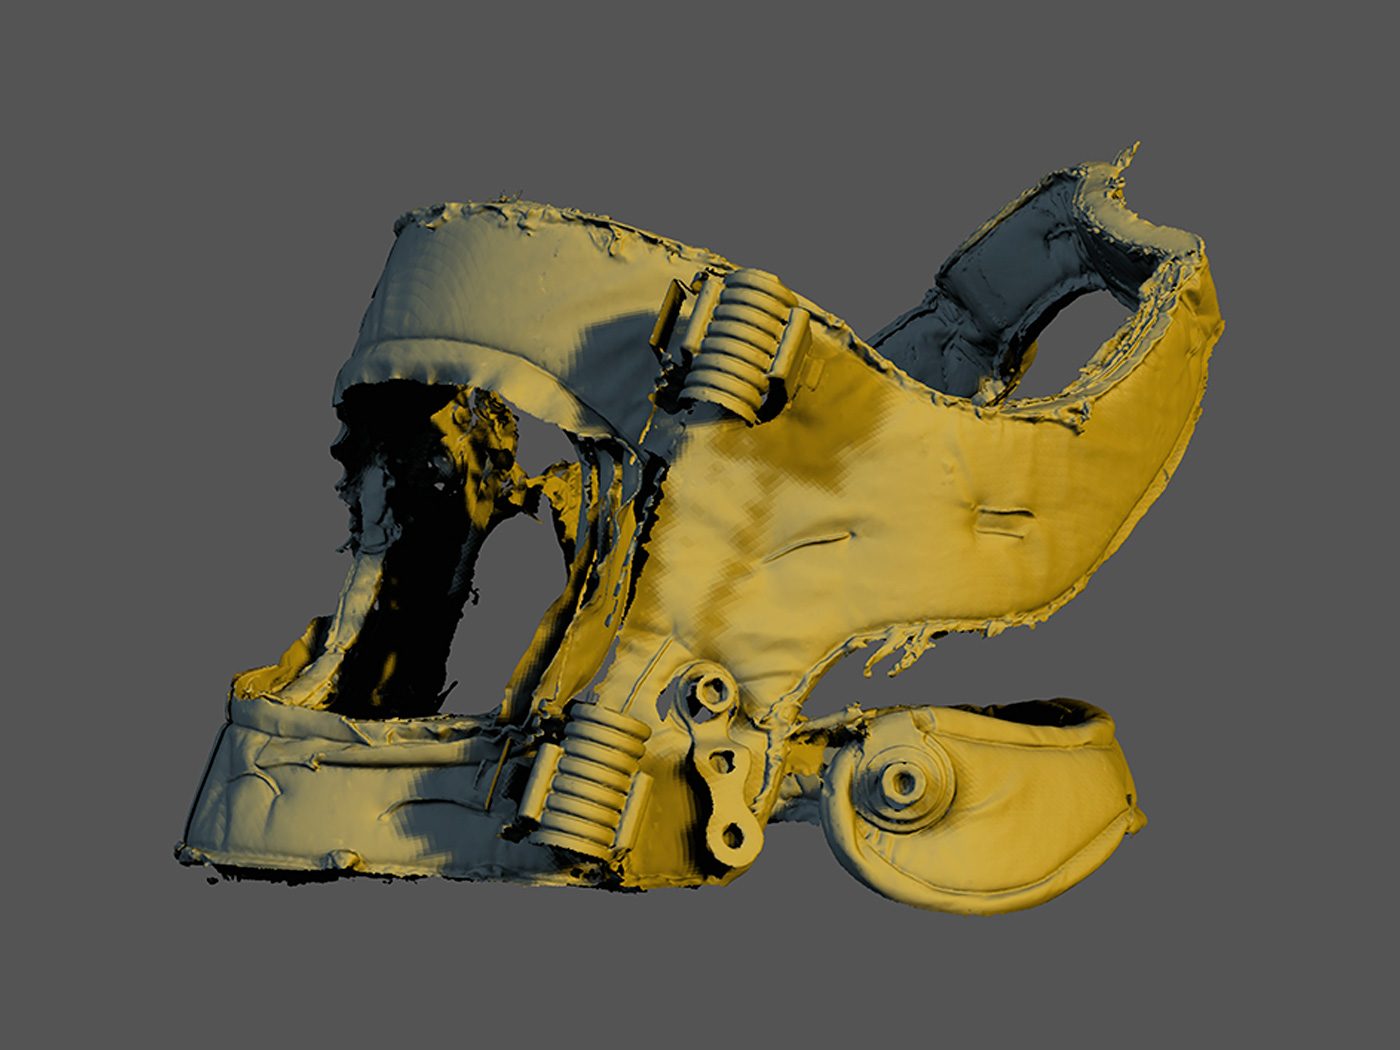 Photogrammetry of a cervical support. Incorrect scans can be seen in some places, resulting in overlays and fragments.